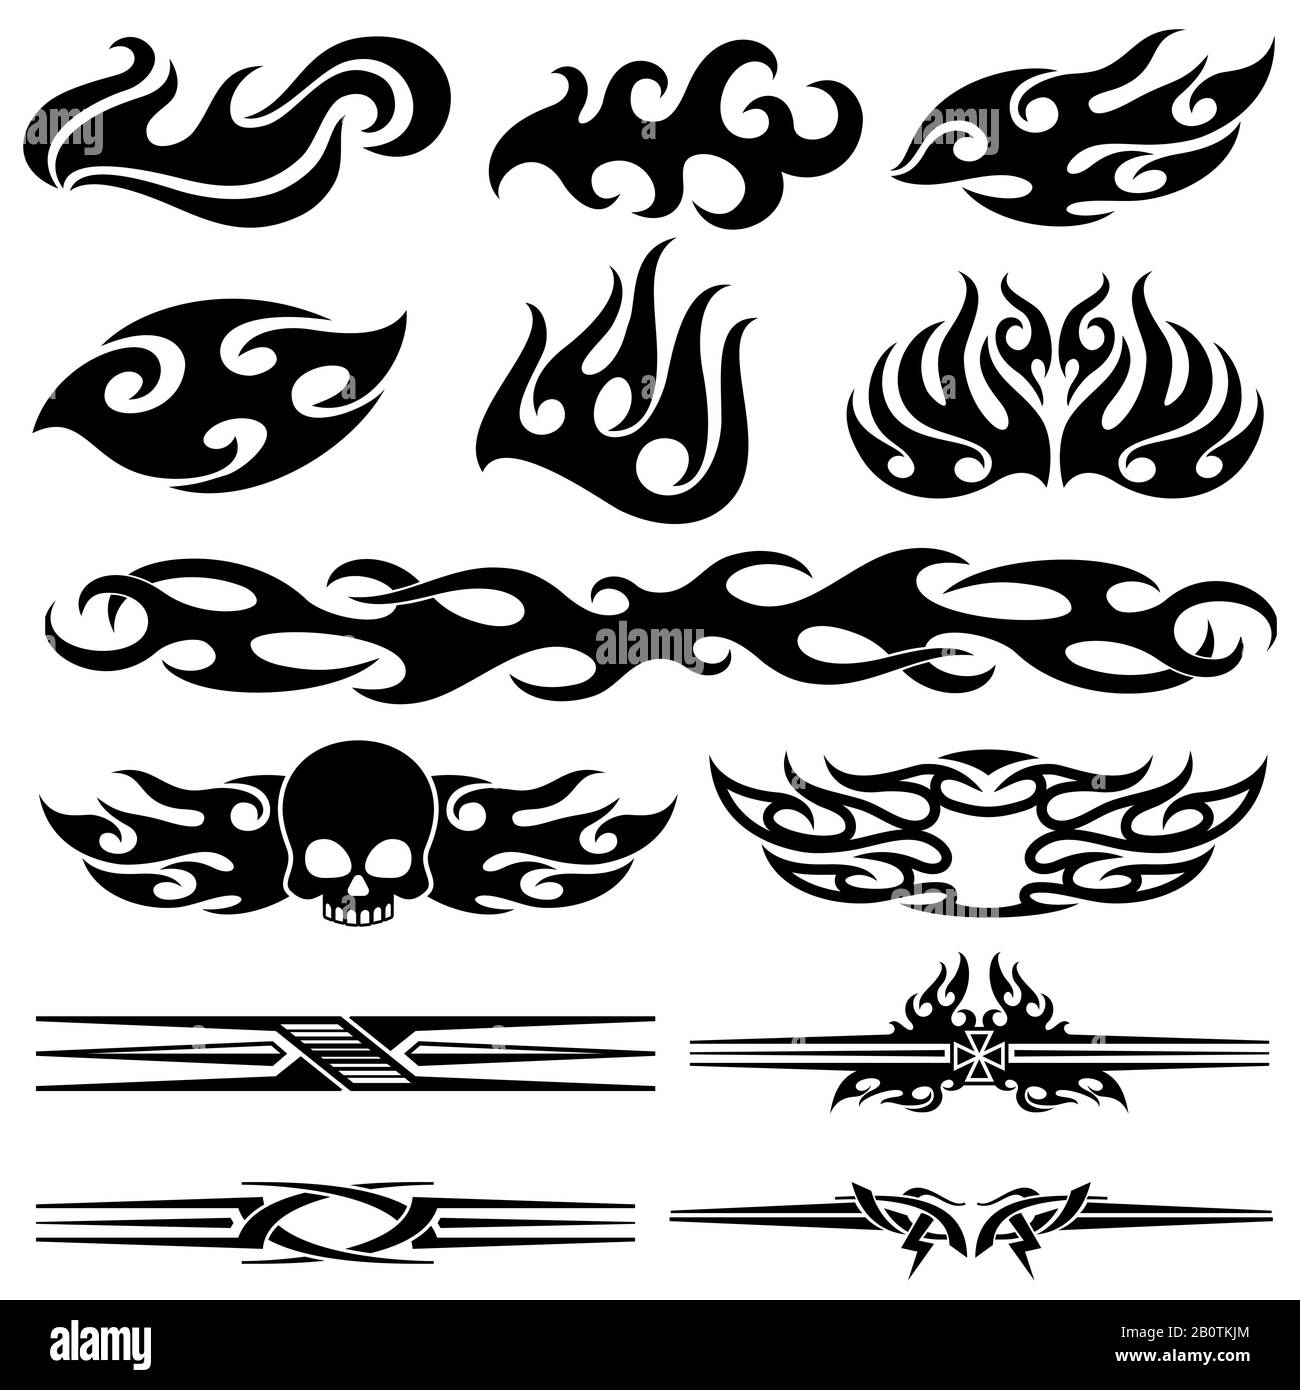 Tribal tattoo clipart Royalty Free Stock SVG Vector